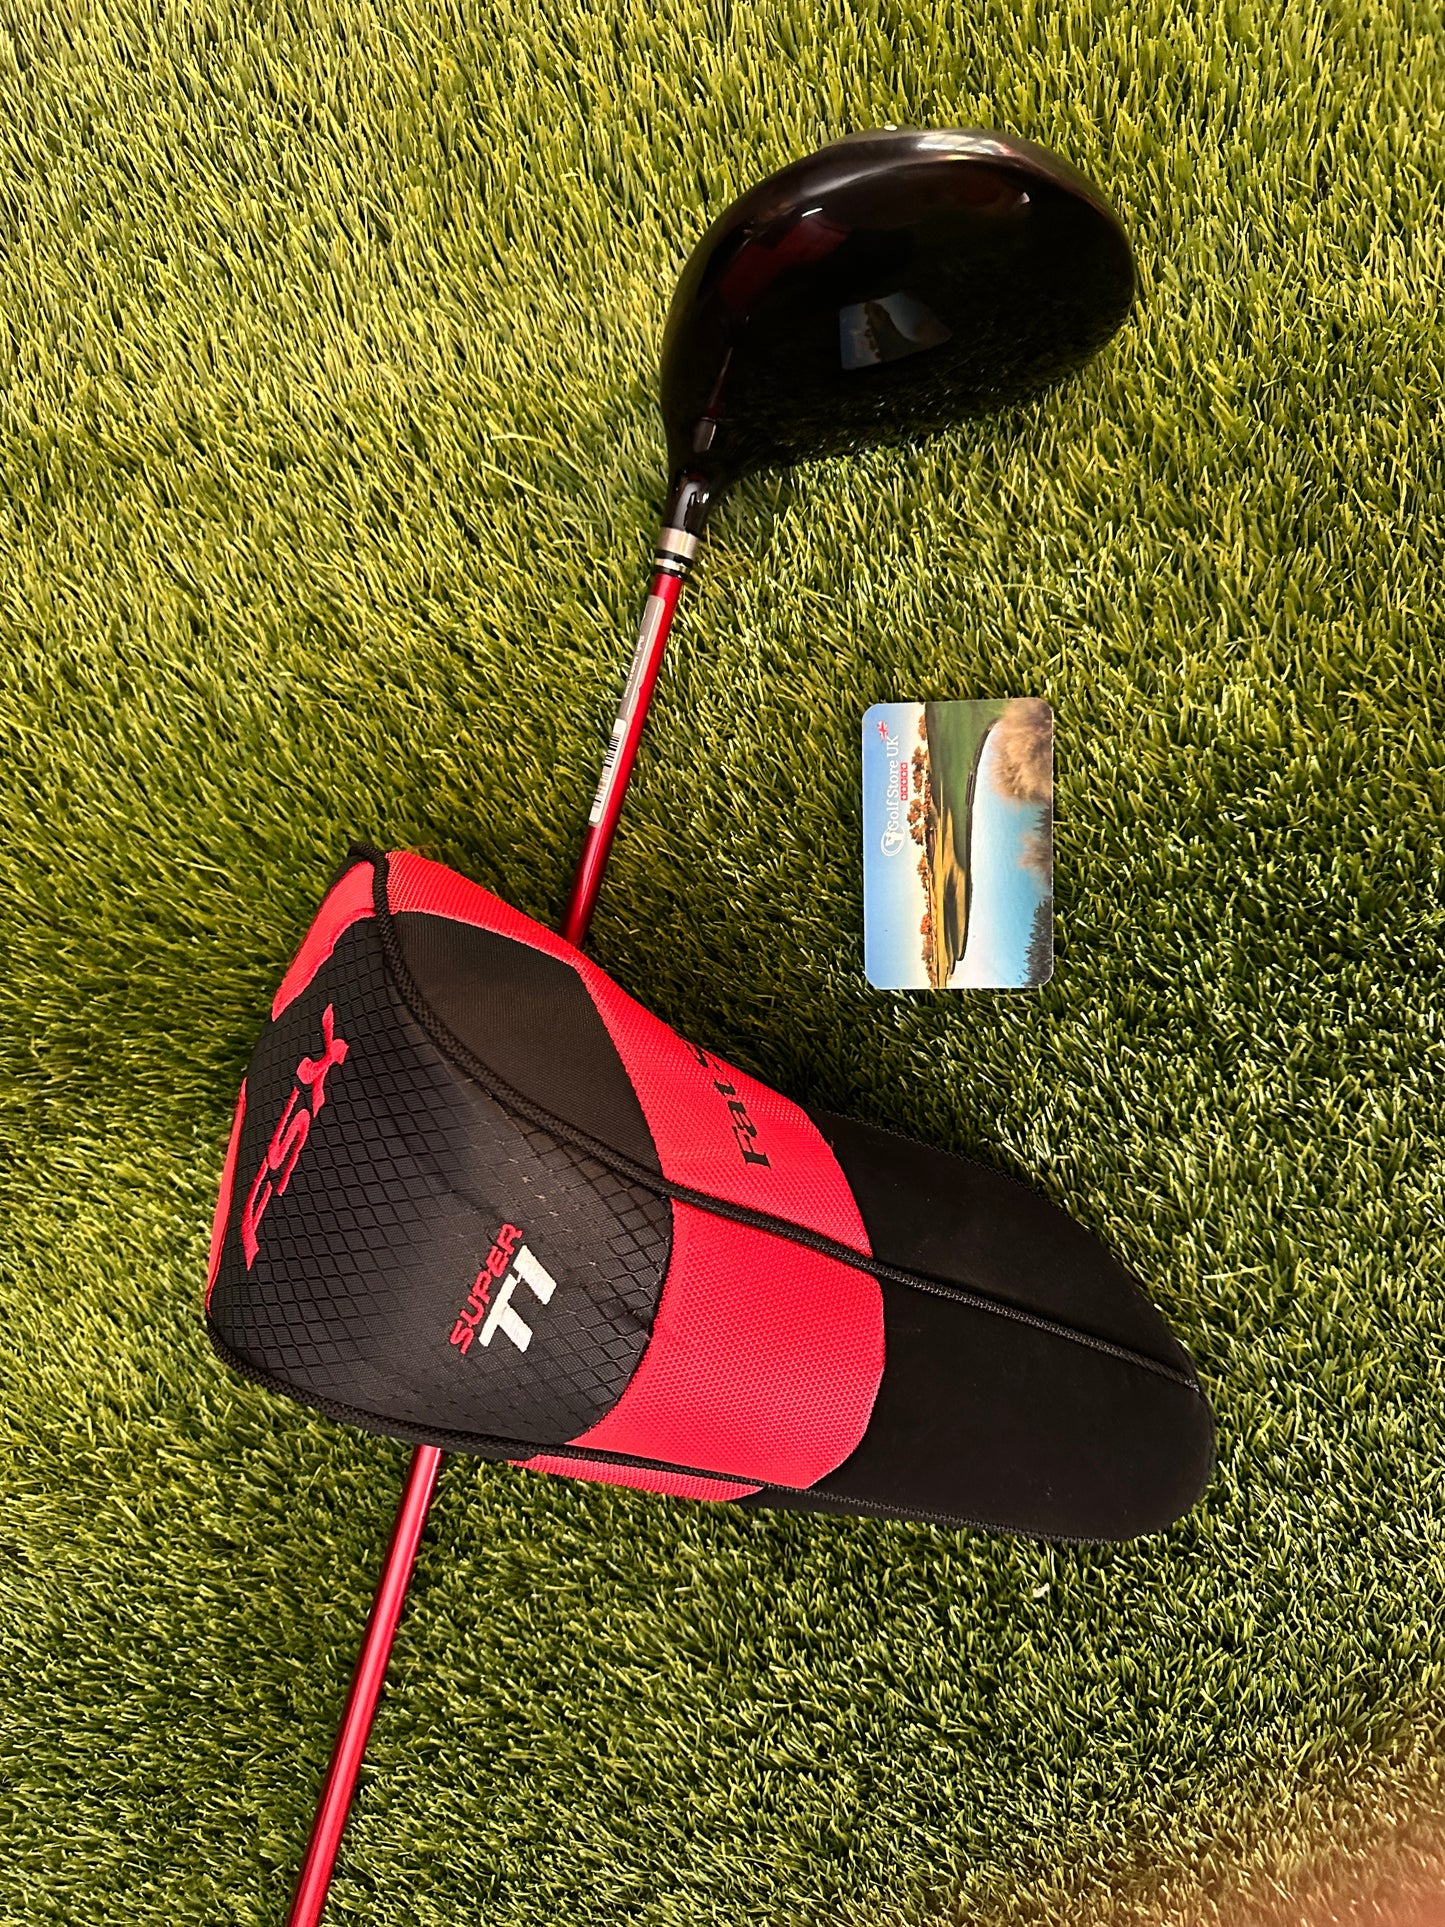 Wilson DXi Superlight Driver and Headcover, Stunning Club